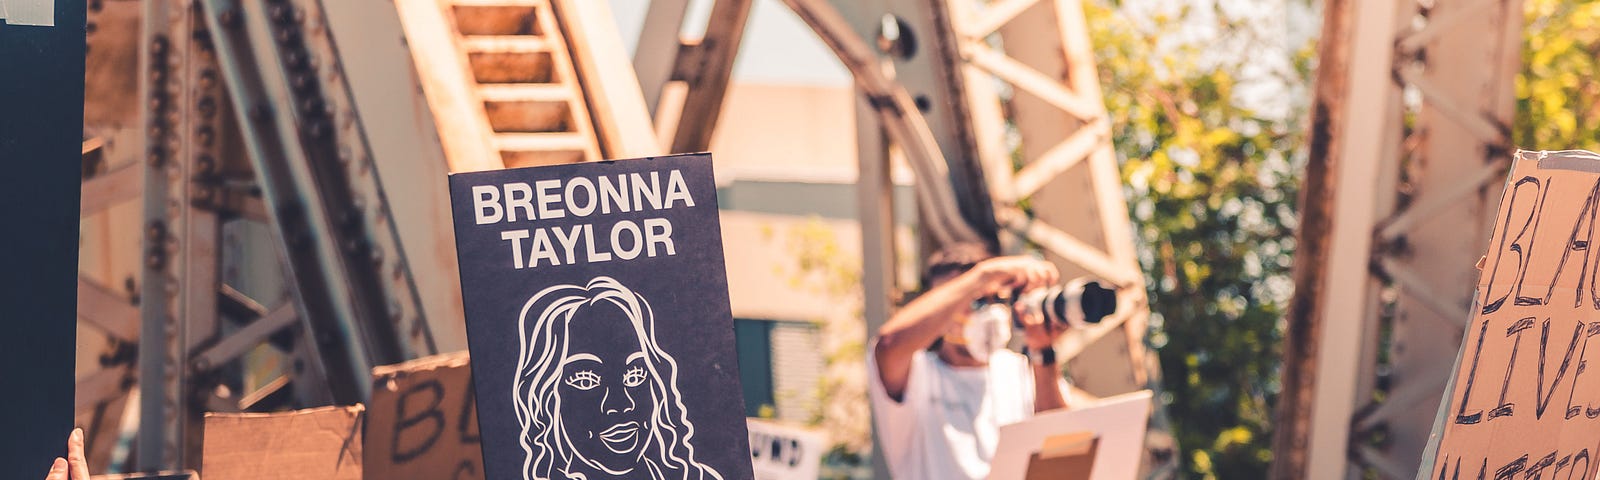 protestors with black and white signs, breonna taylor sign